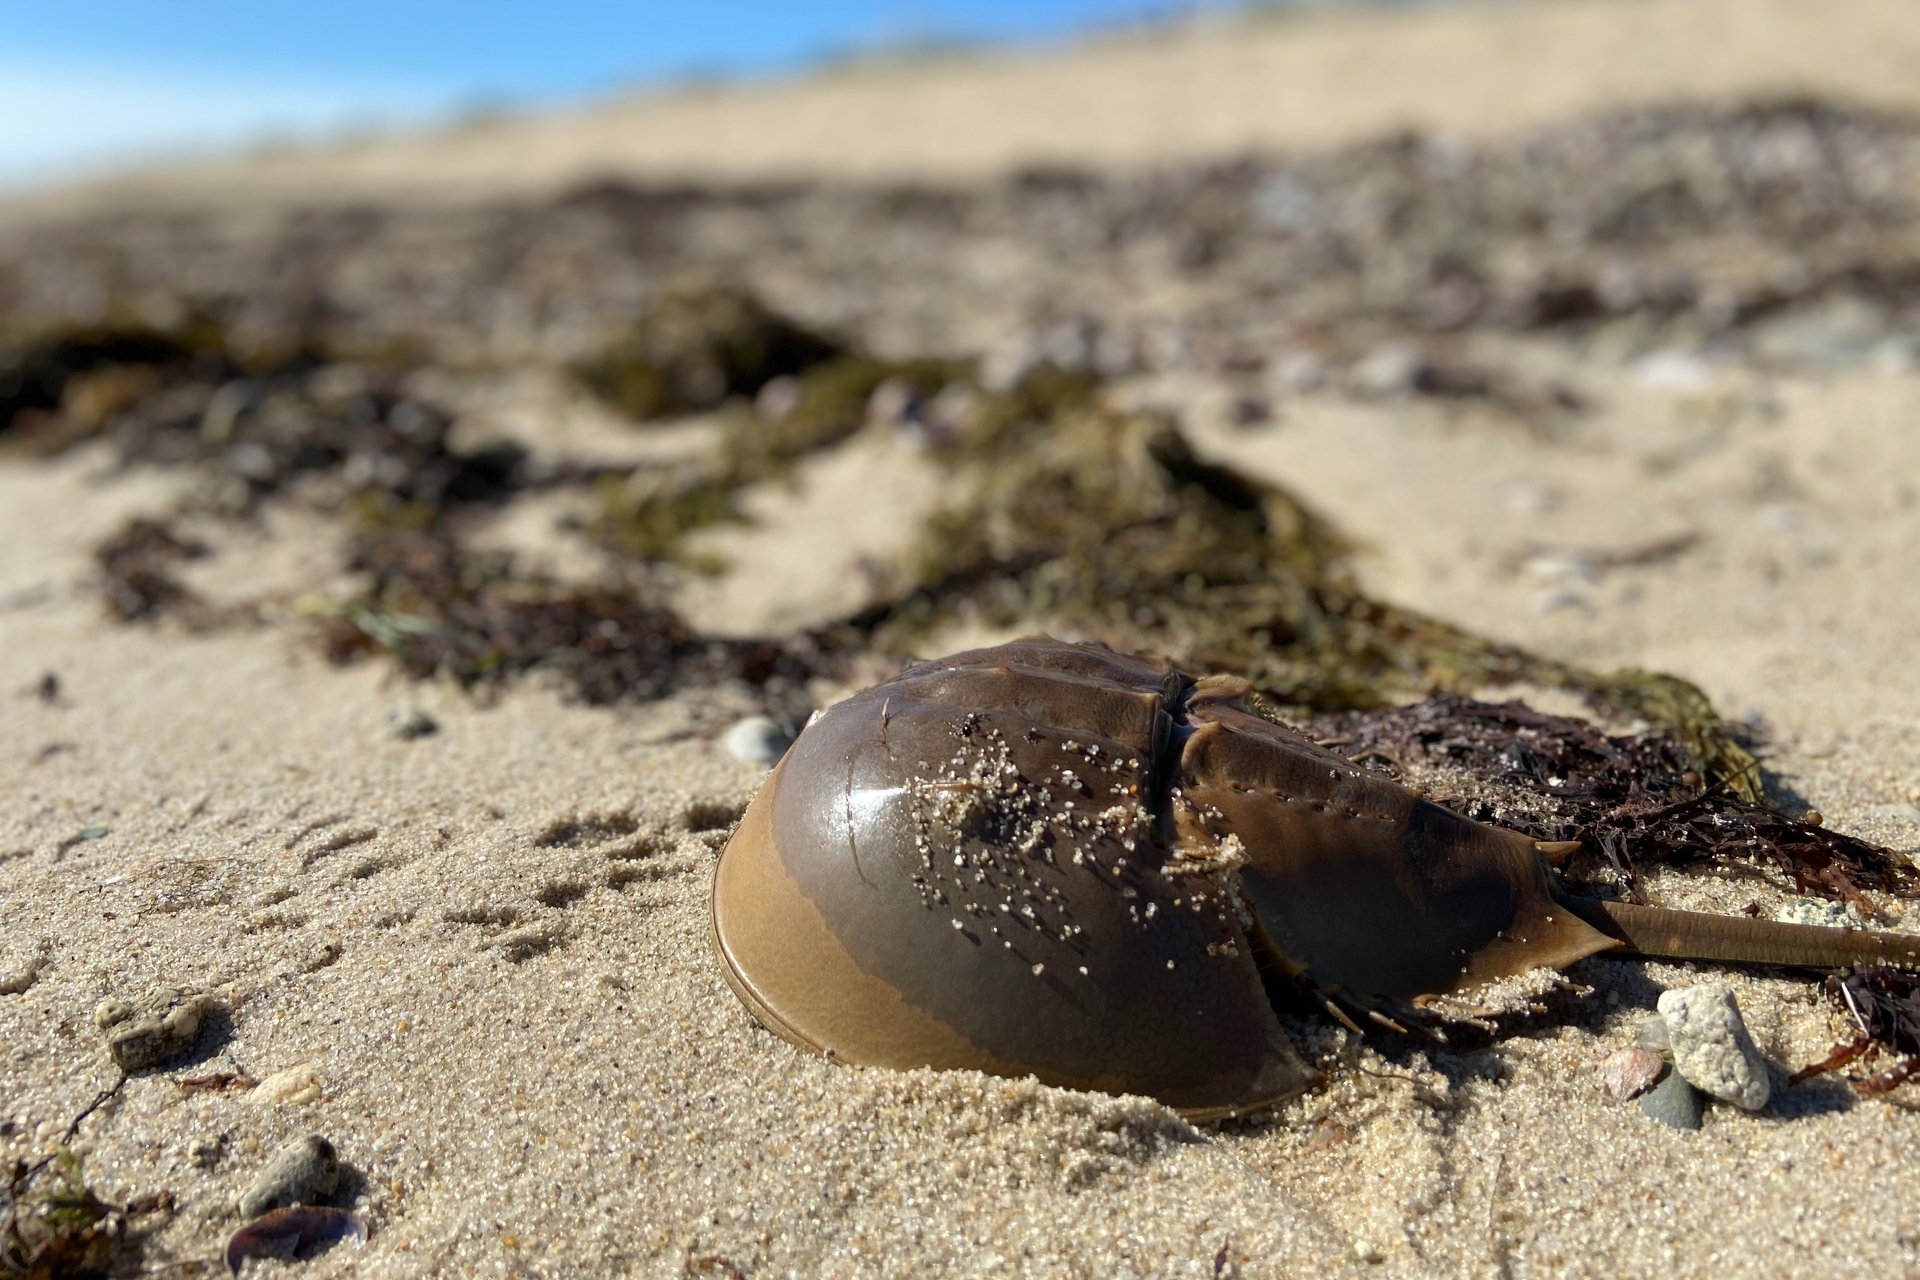 A horseshoe crab lounges on the beach, surrounded by seaweed